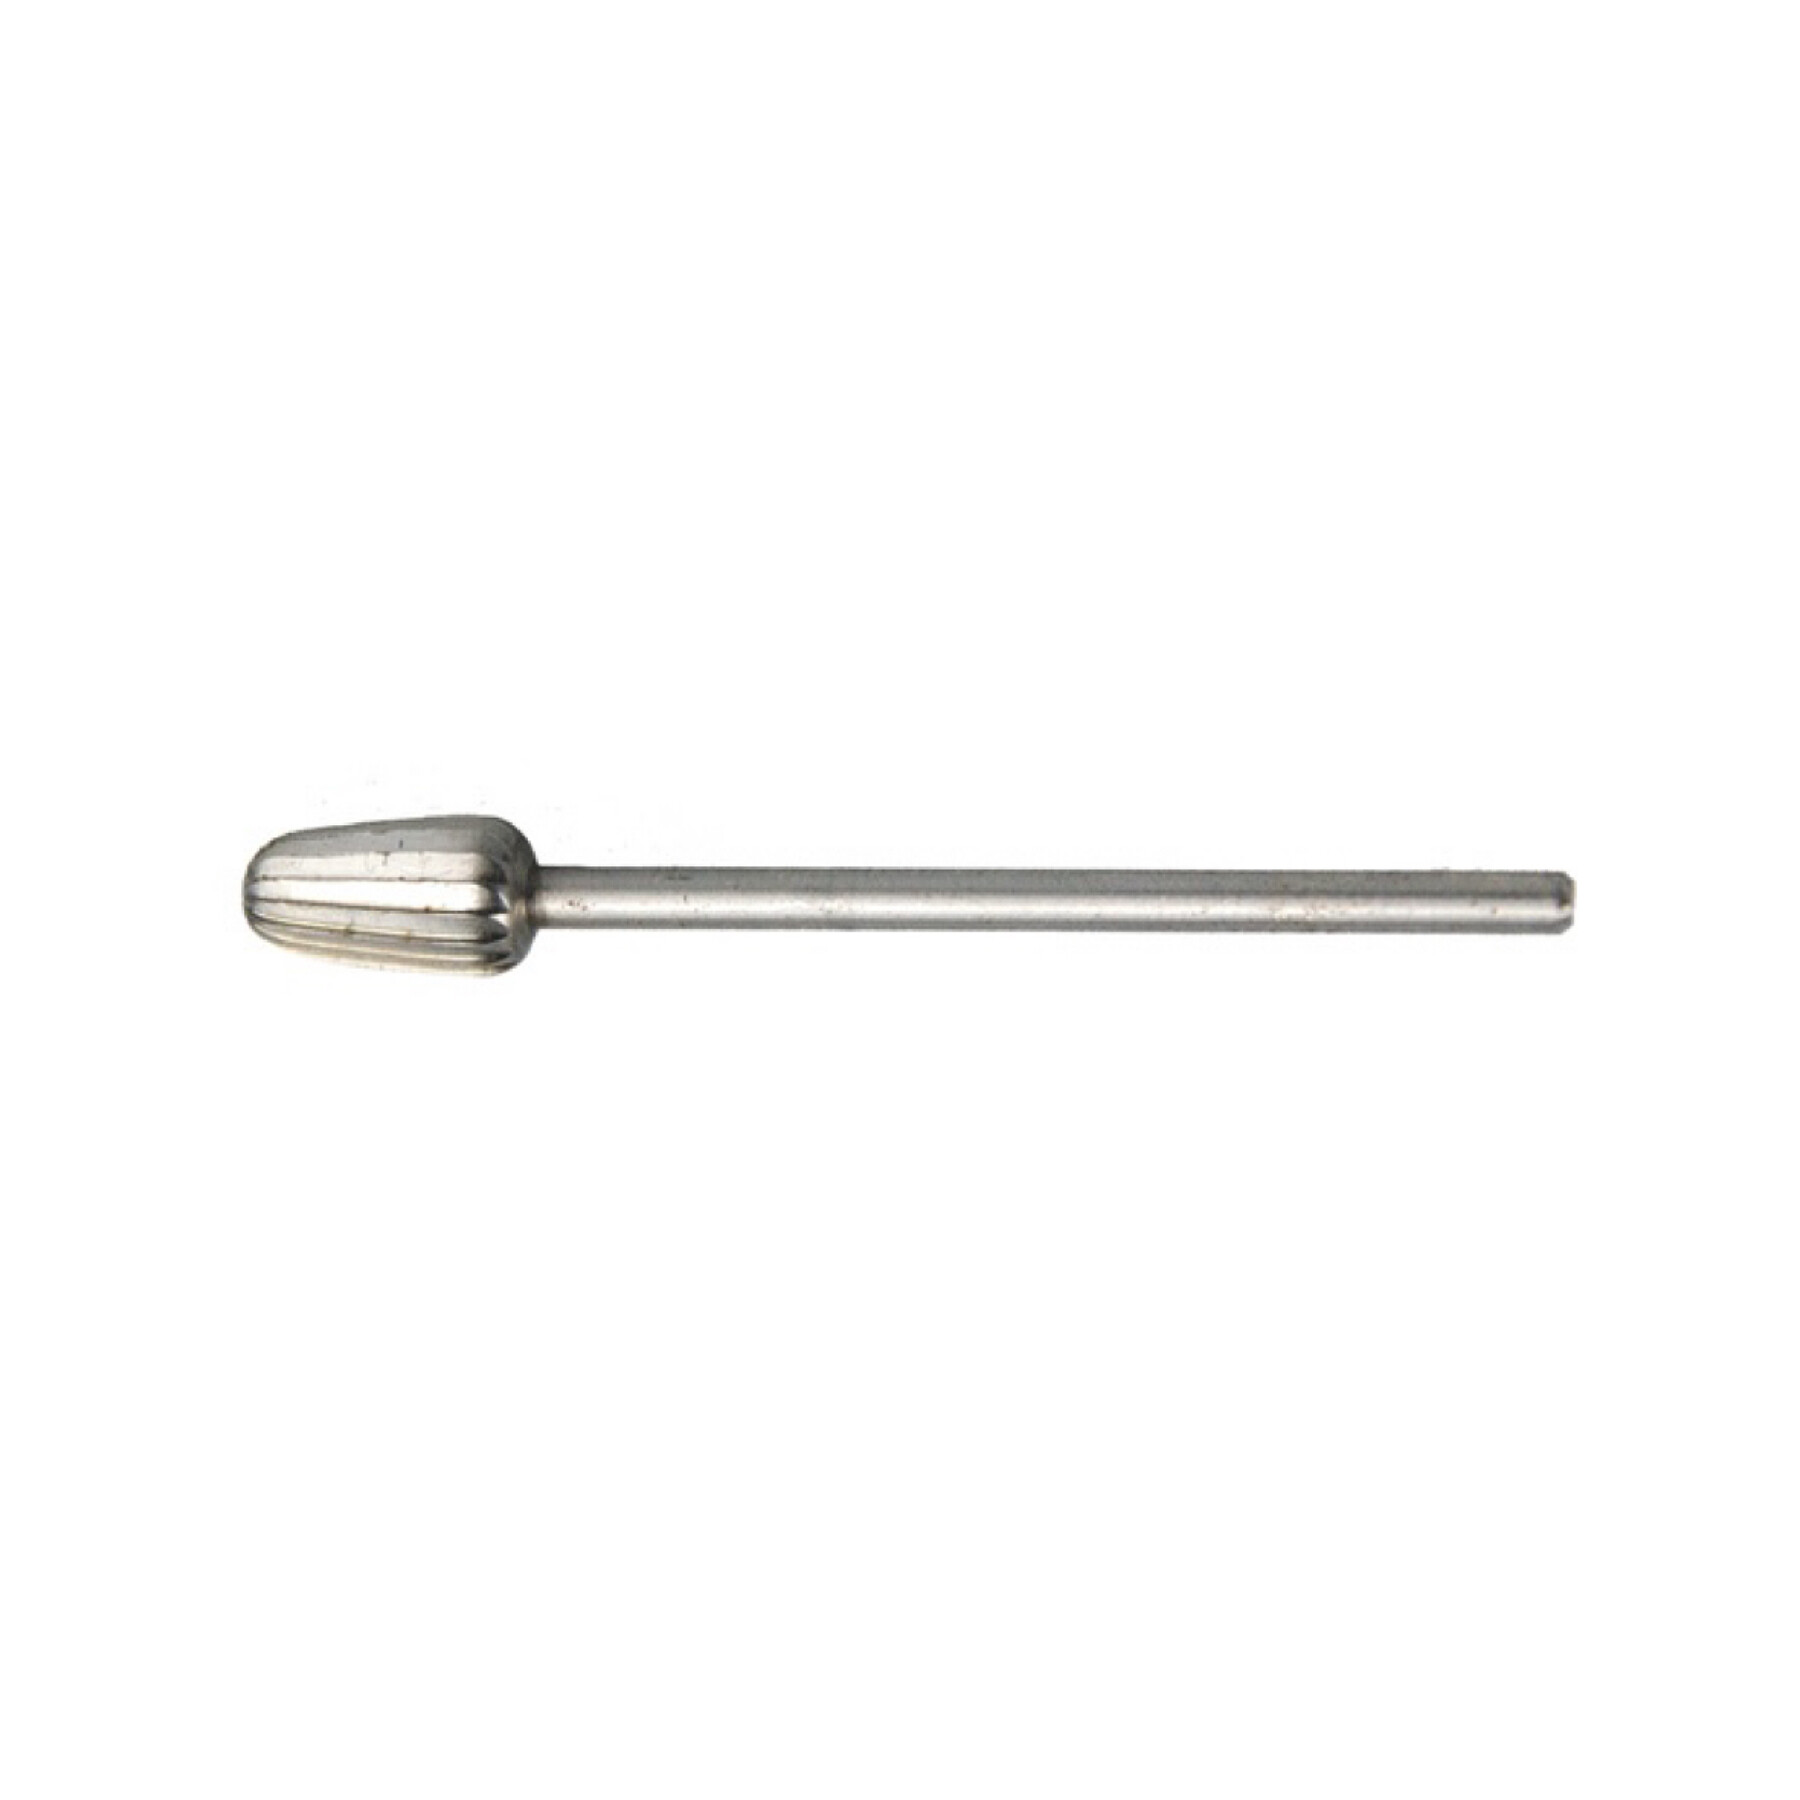 Steel Conically Shaped Burs Cutters For Hard Earmold Grinding